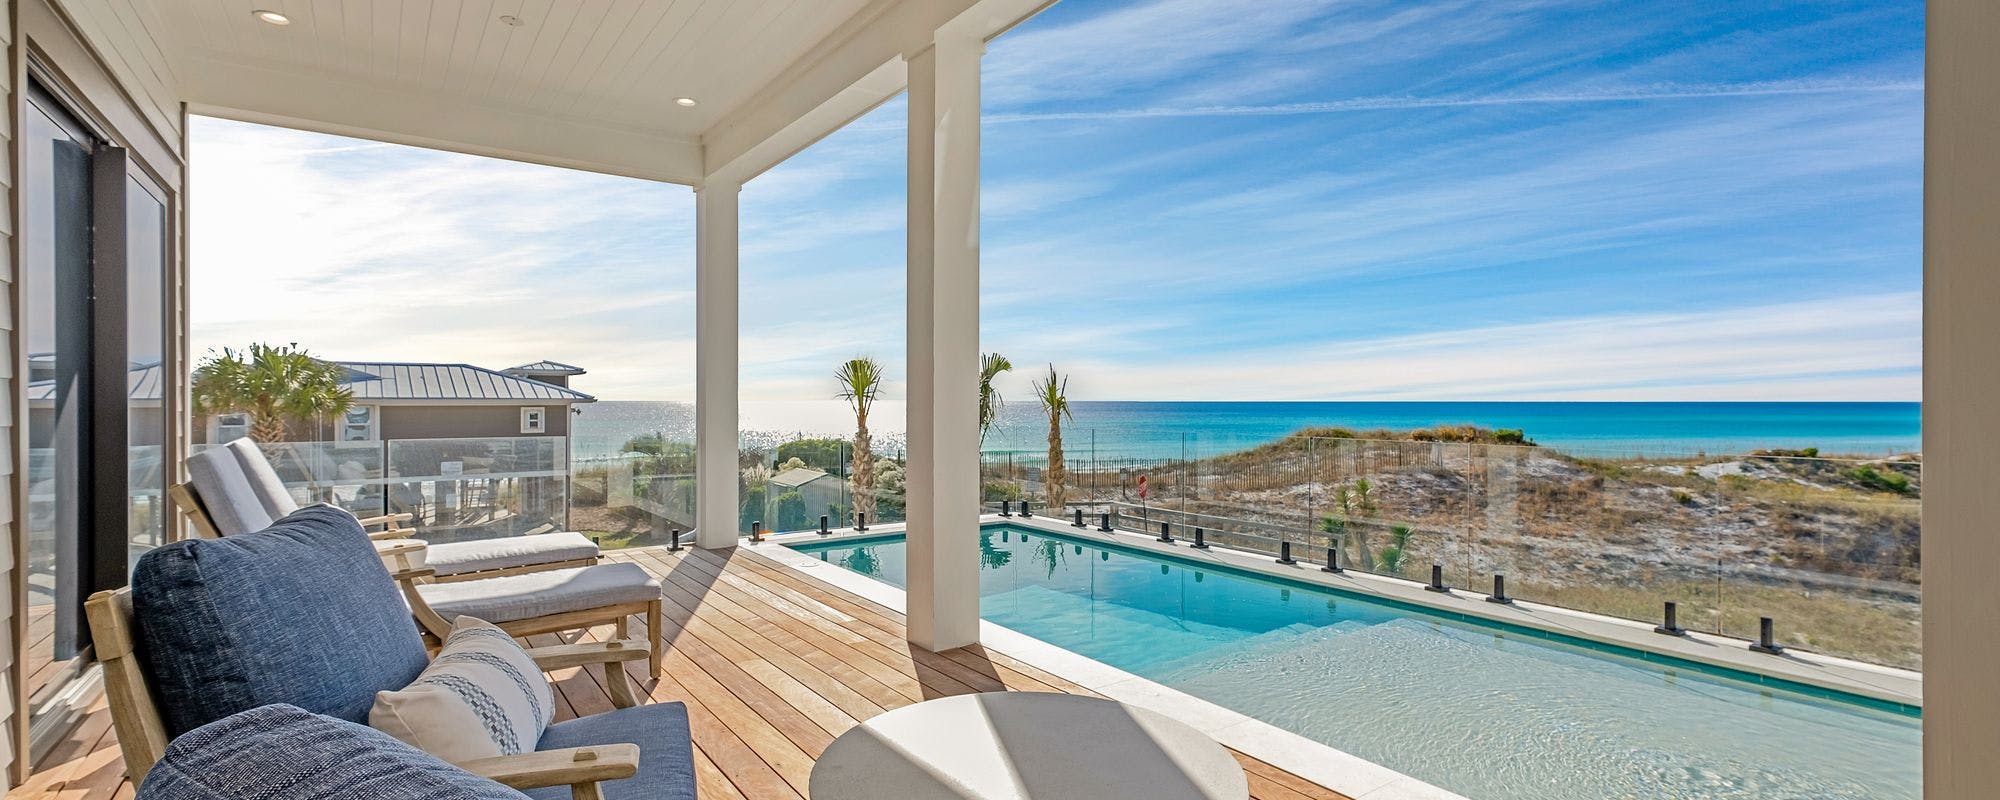 Porch overlooking pool and Gulf of Mexico